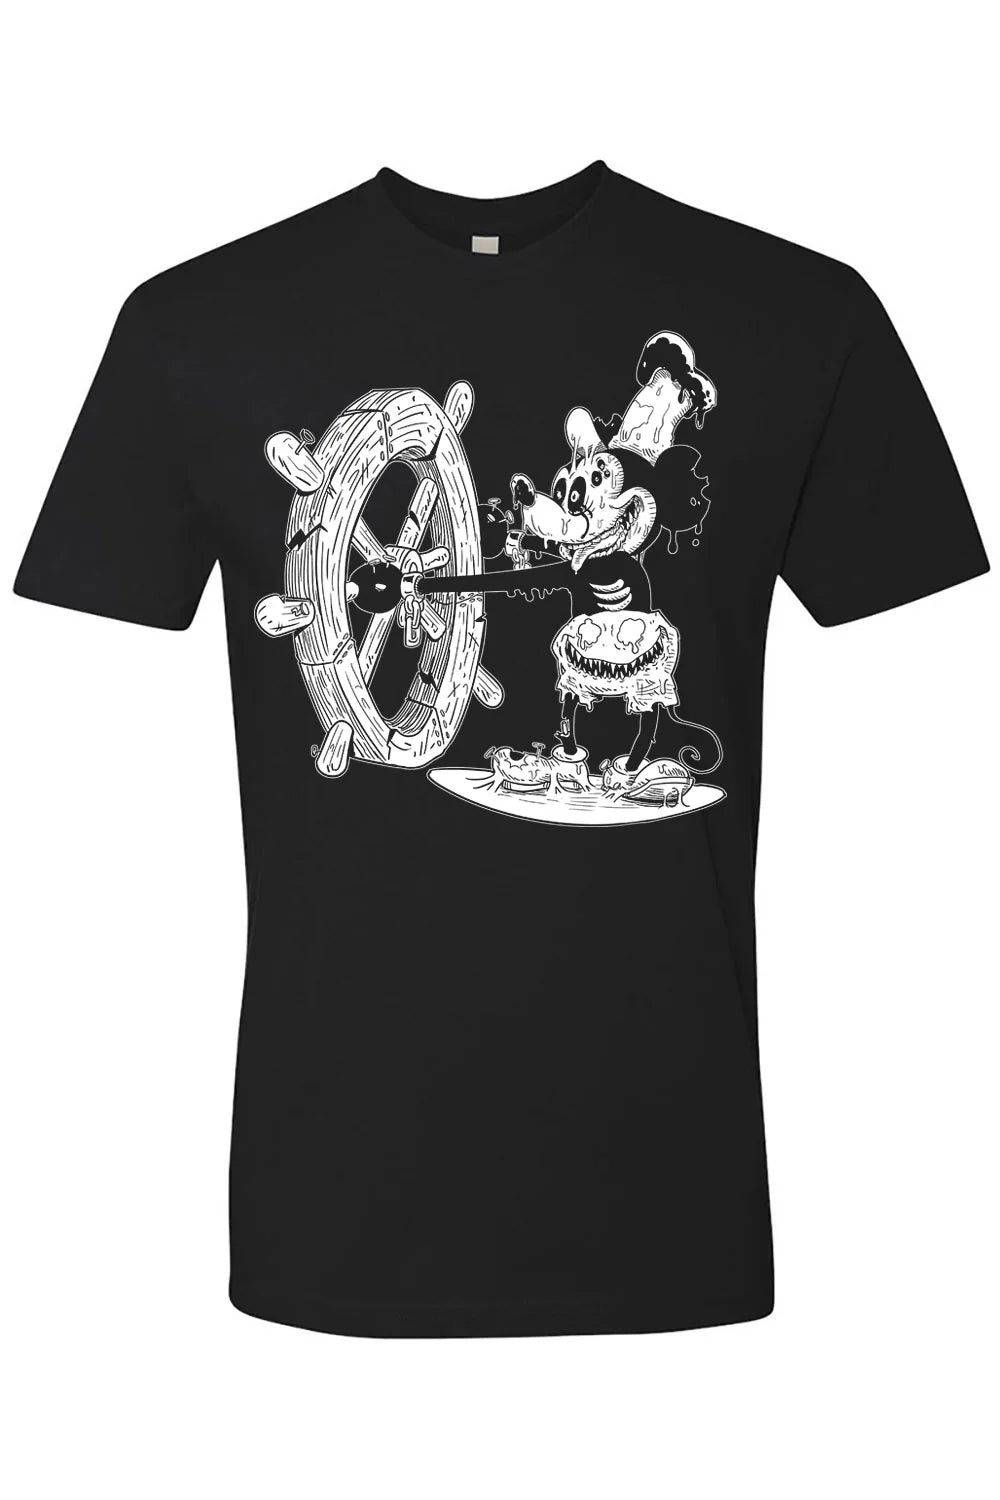 T-Shirt Steamboat Willie Mickey Zombie